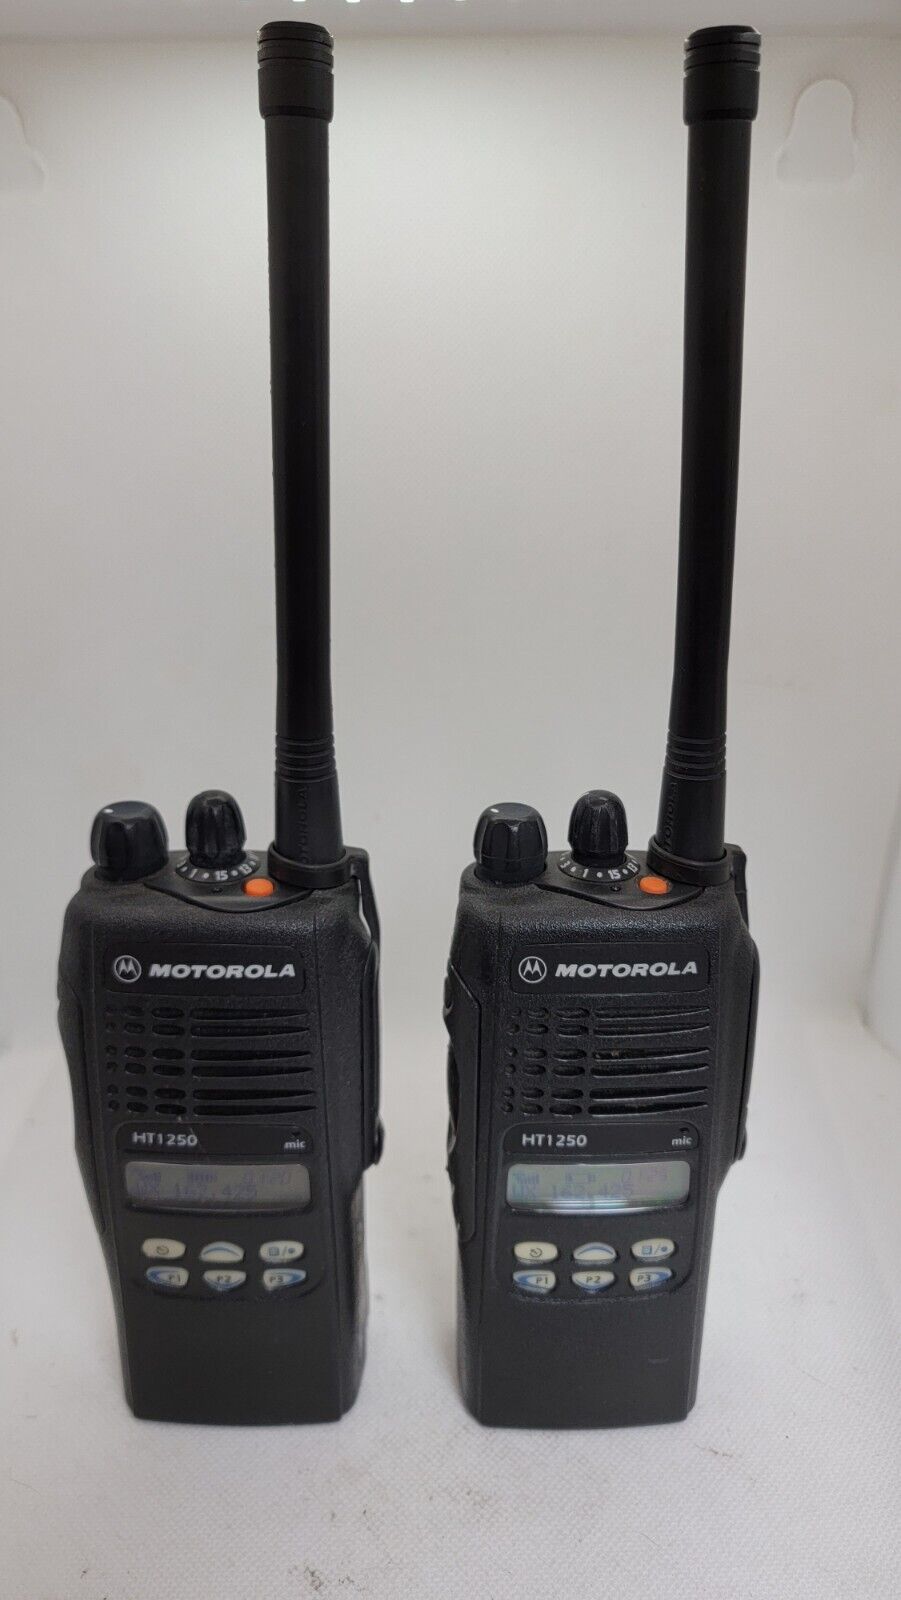 Motorola Ht1250 Vhf 136-174 Mhz 128 Channels Murs Tested Lot Of 2